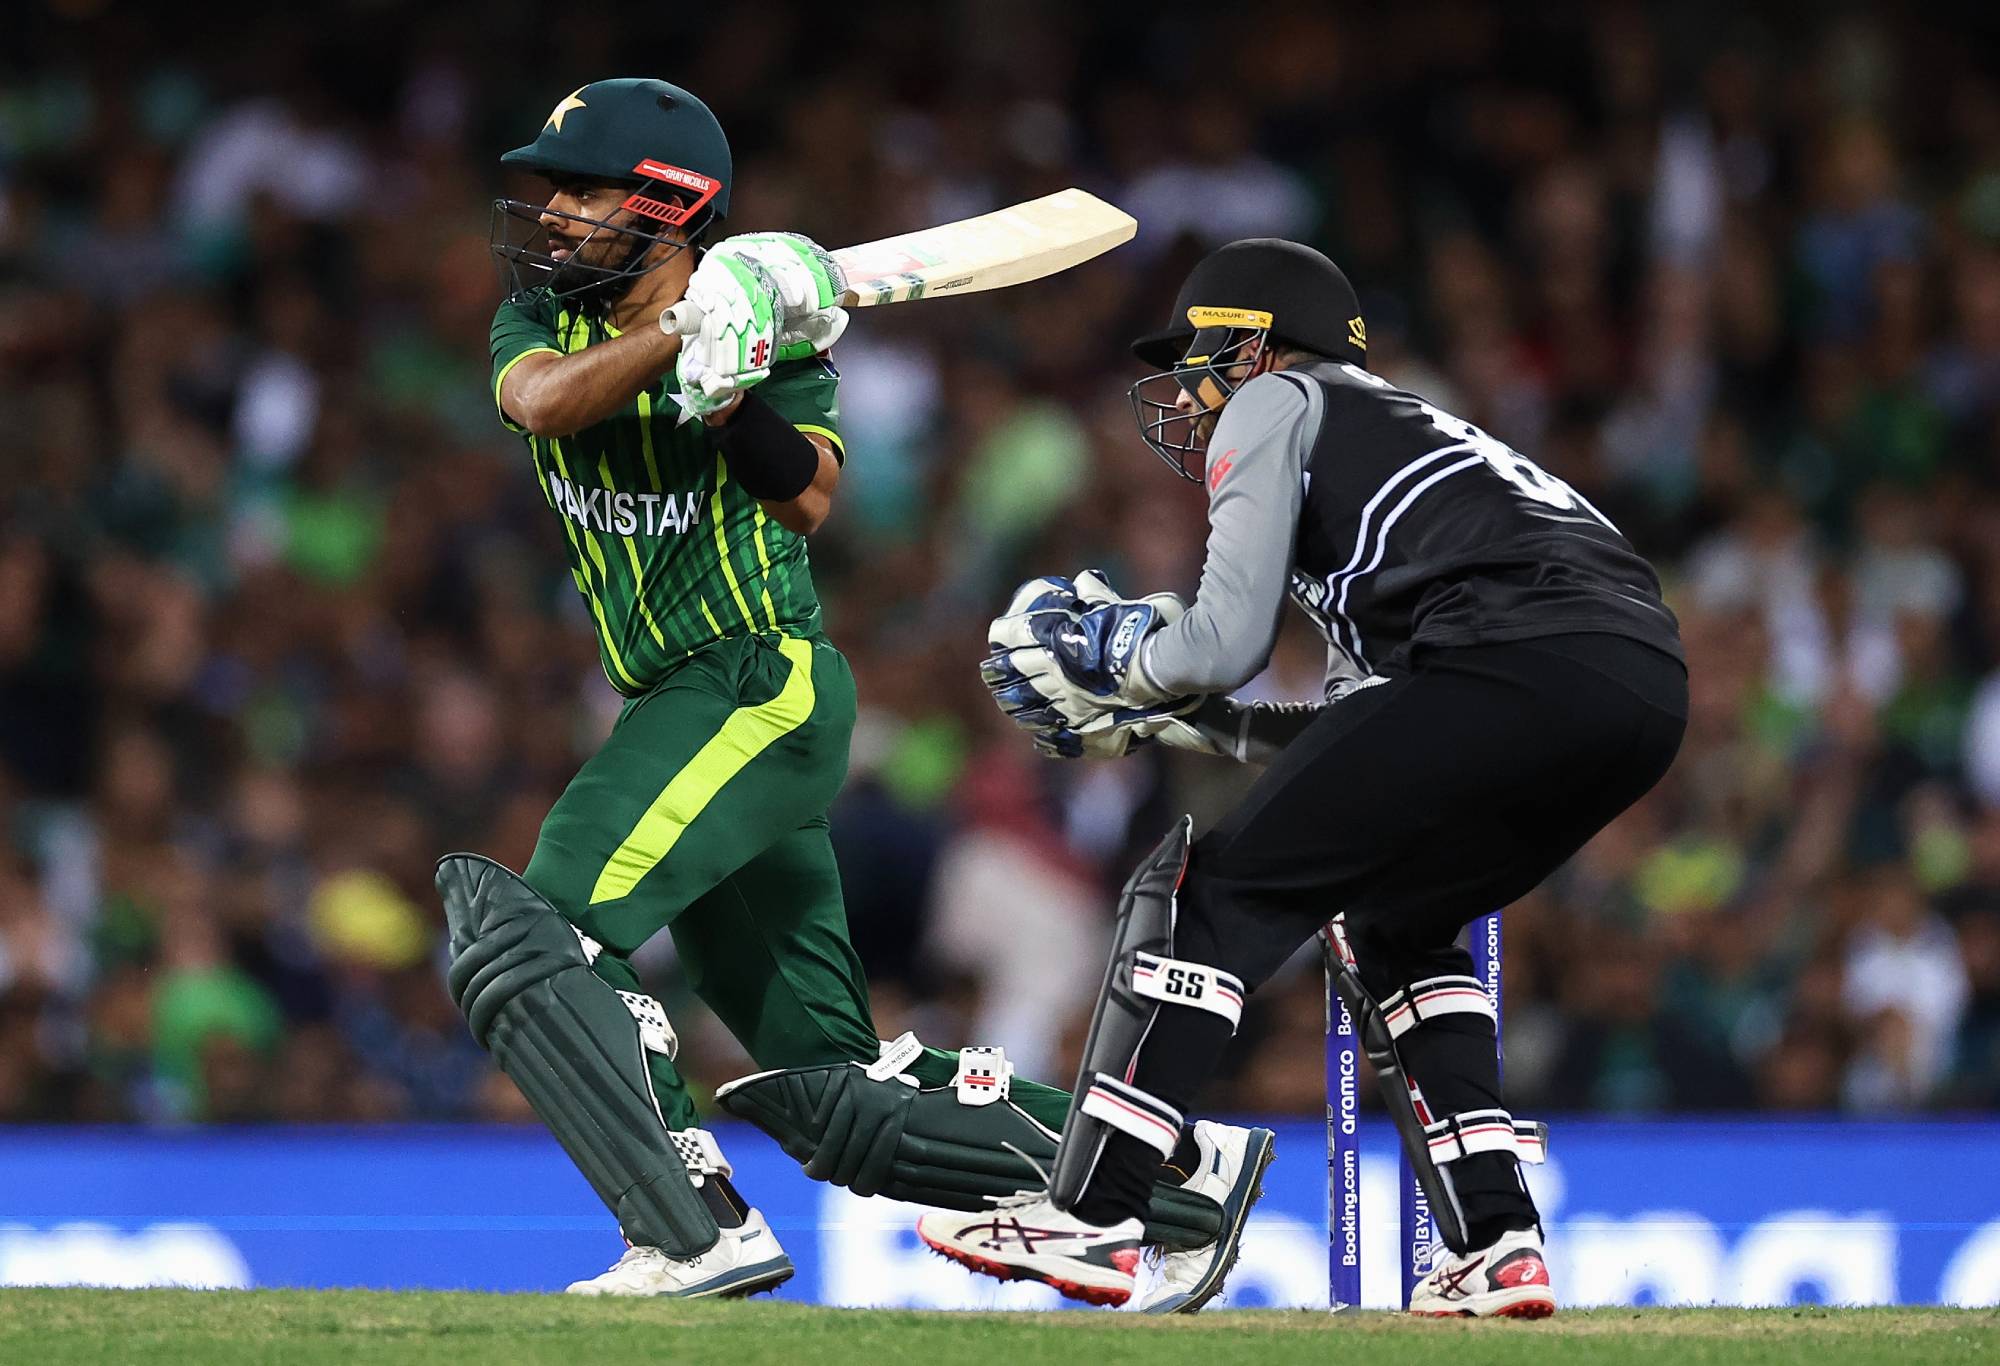 SYDNEY, AUSTRALIA - NOVEMBER 09: Babar Azam of Pakistan bduring the ICC Men's T20 World Cup Semi Final match between New Zealand and Pakistan at Sydney Cricket Ground on November 09, 2022 in Sydney, Australia. (Photo by Cameron Spencer/Getty Images)